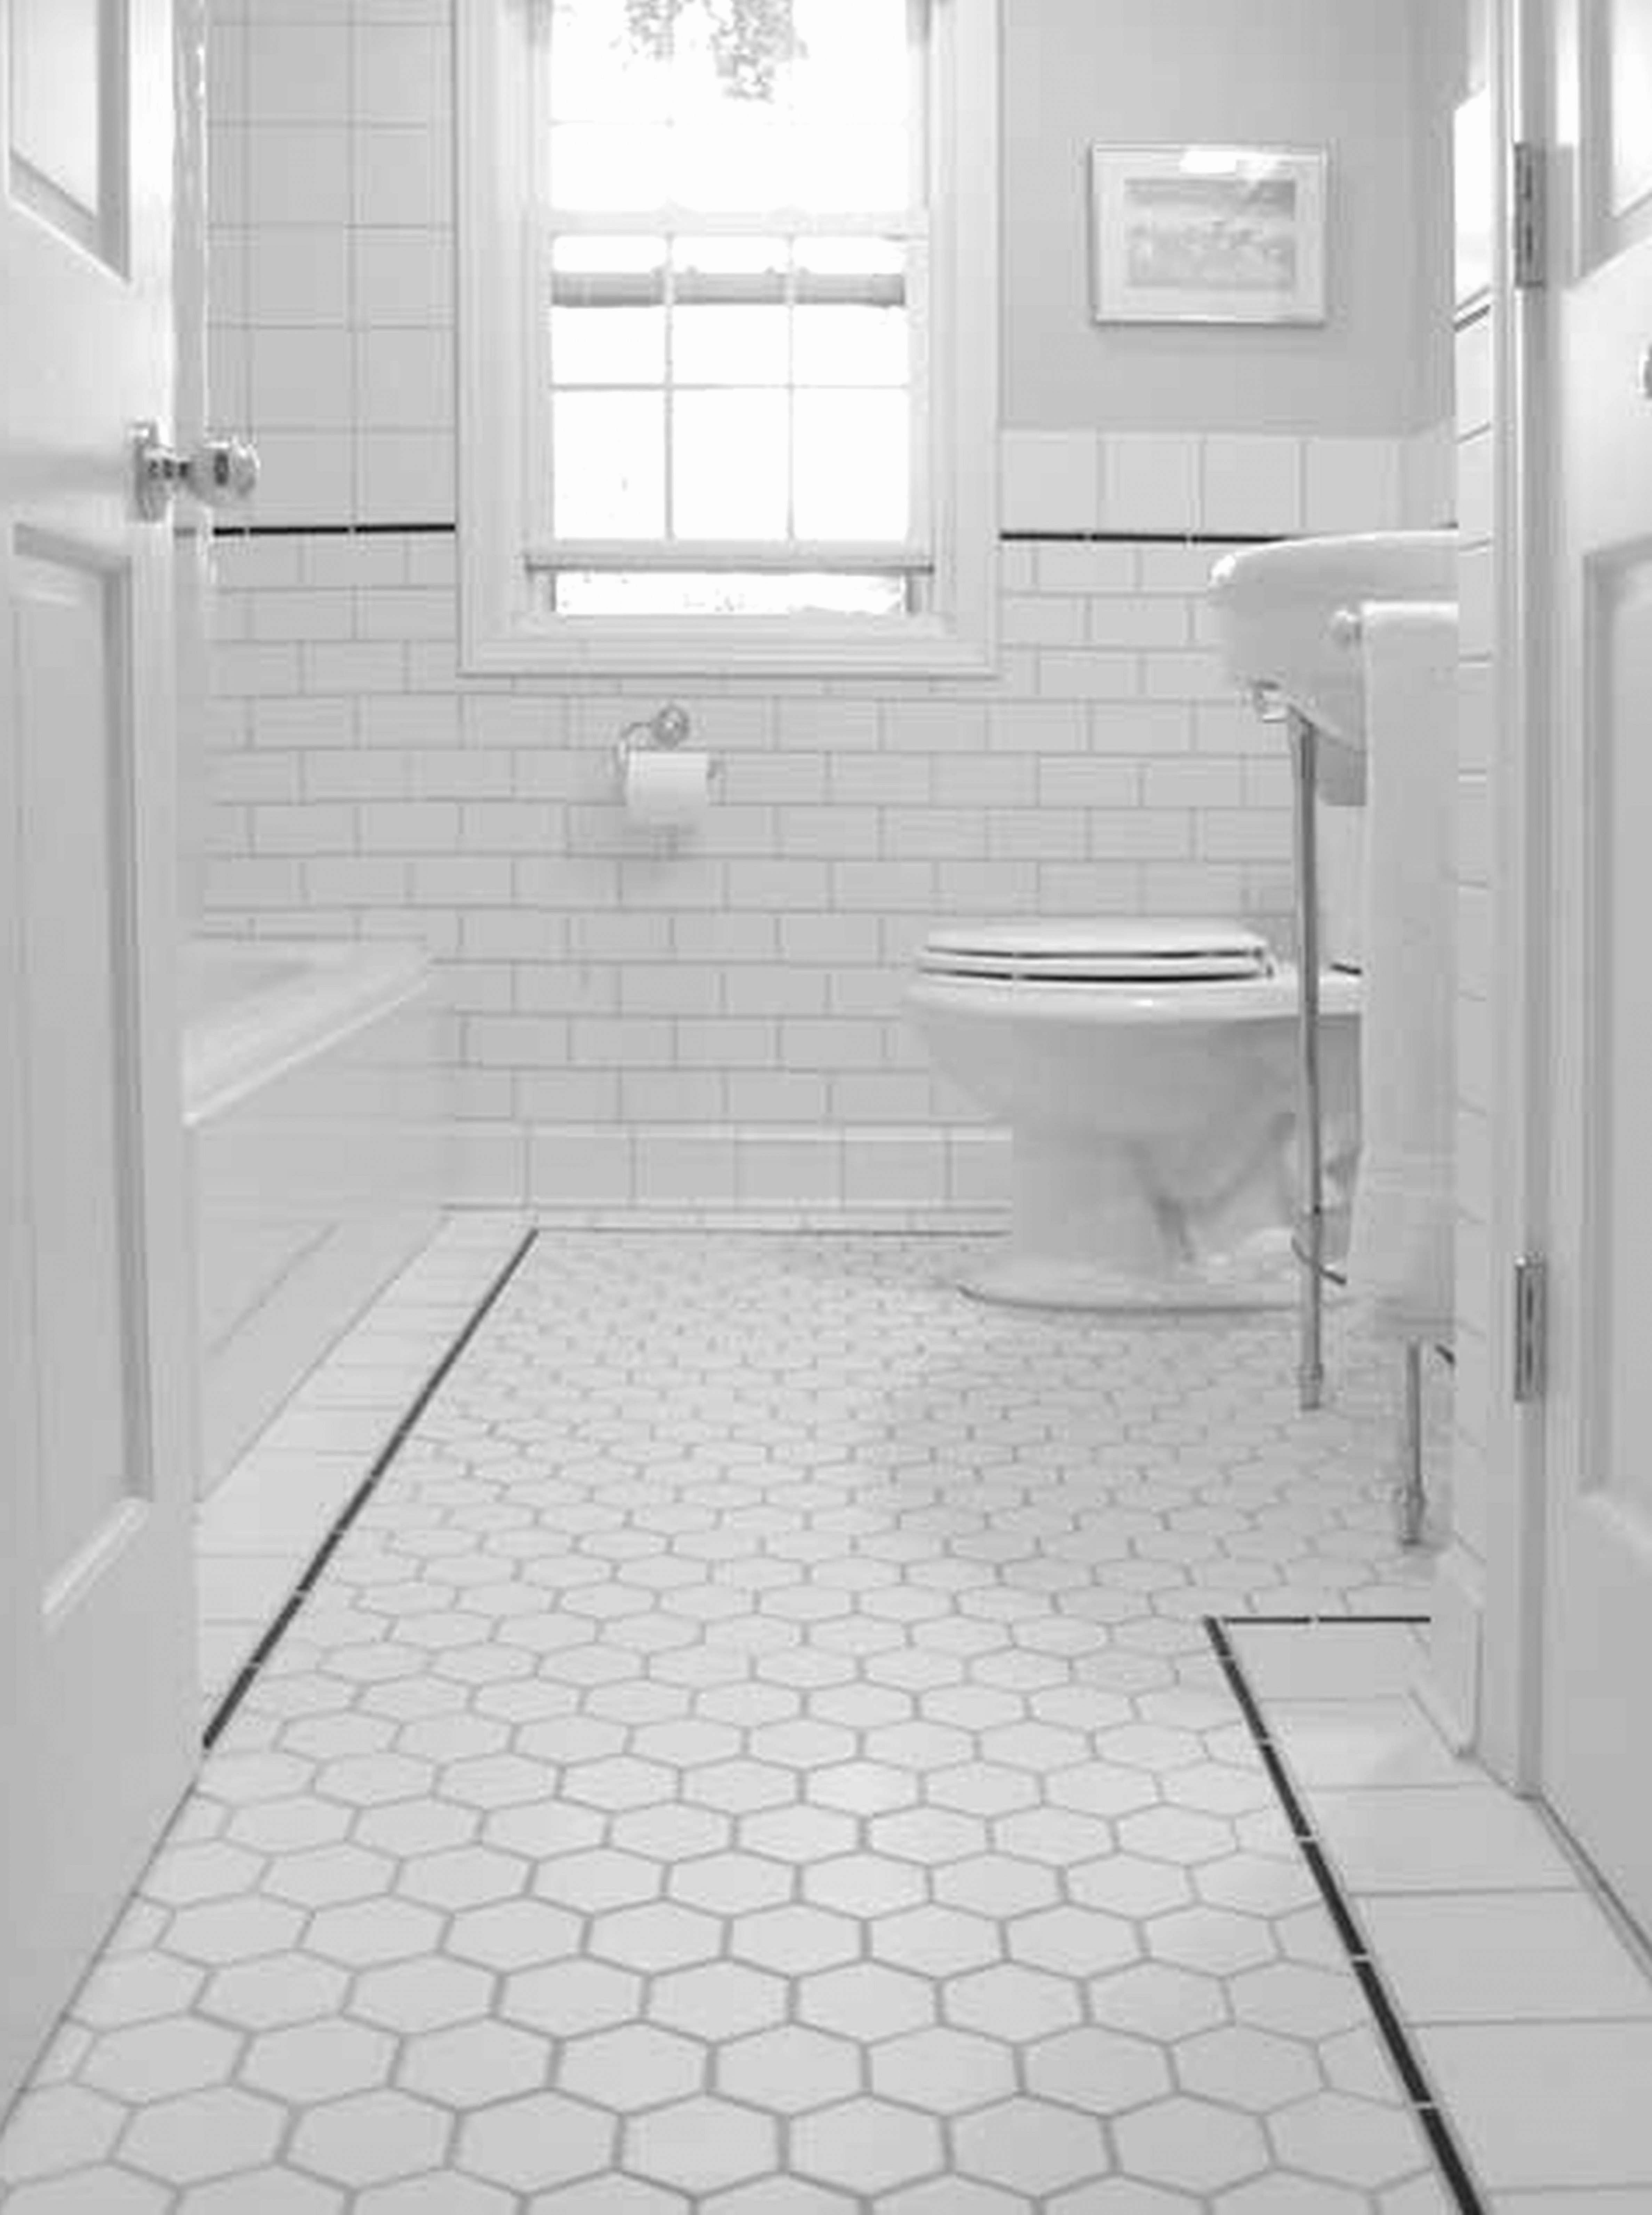 21 Great Avg Cost Of Hardwood Flooring Installed 2024 free download avg cost of hardwood flooring installed of 33 awesome how much does it cost to tile a bathroom trhaberci com inside laying bathroom floor tiles new stunning inspirational installing faucet h